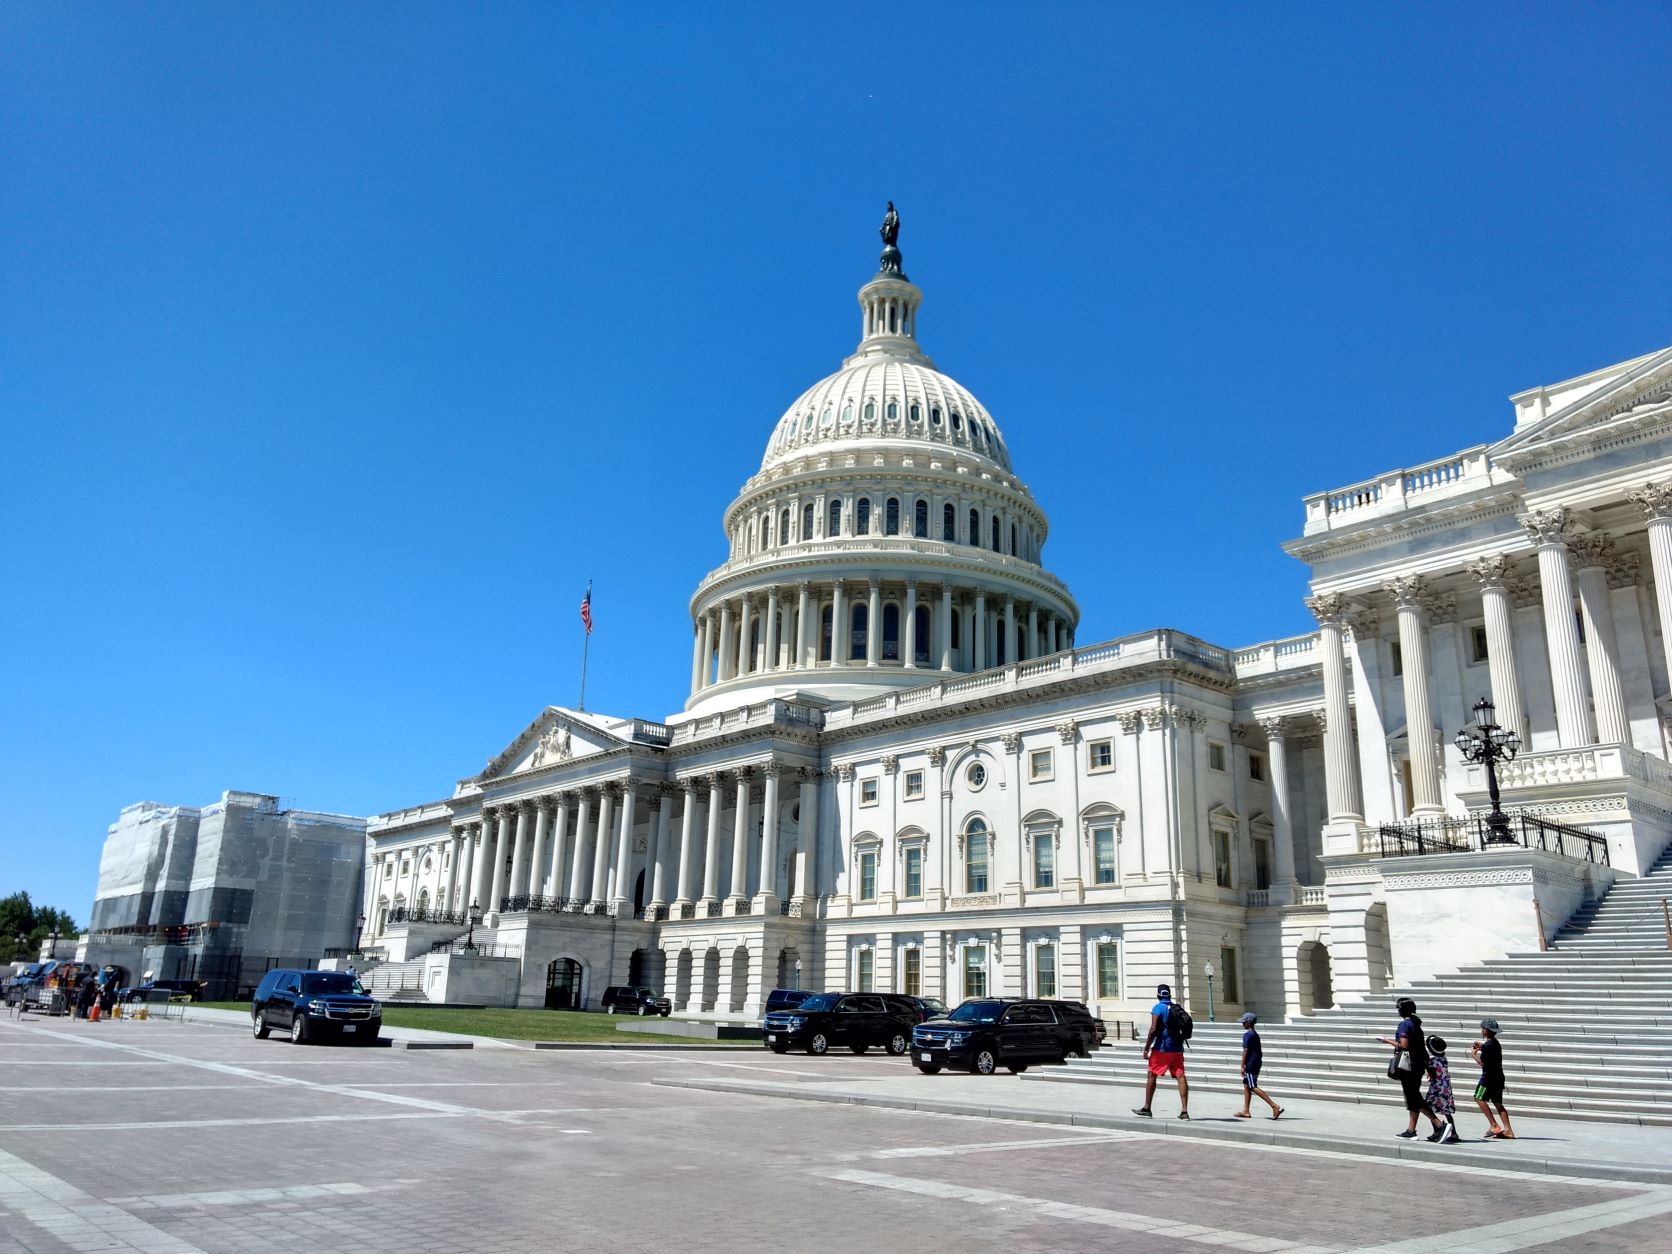 Image of the US Capitol building and a bright blue sky.